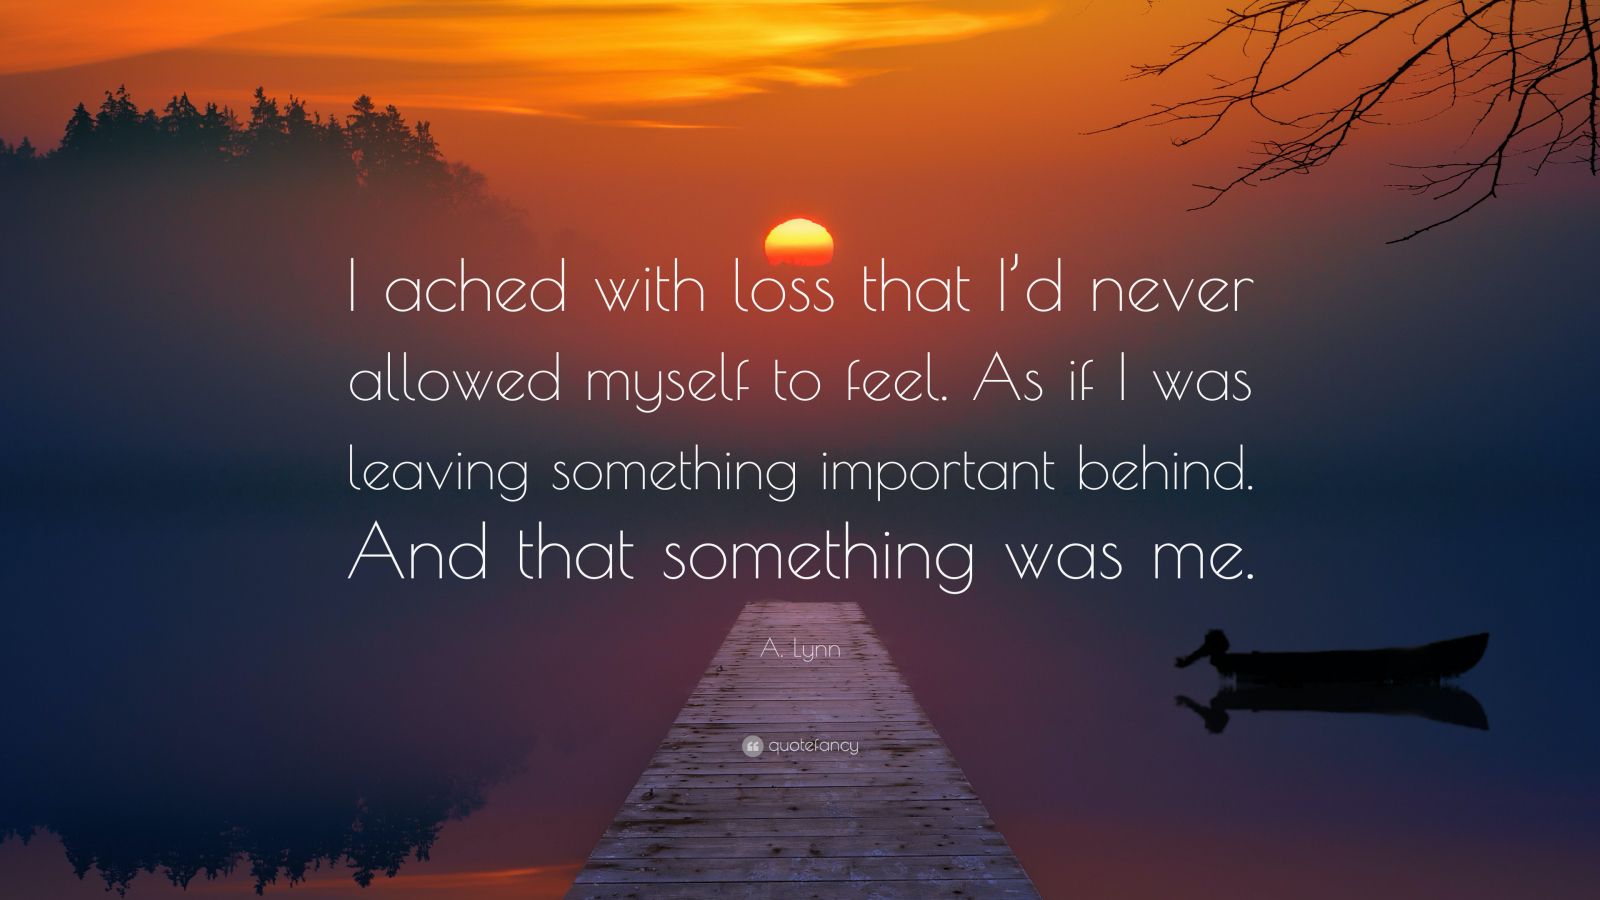 A. Lynn Quote: “I ached with loss that I’d never allowed myself to feel ...